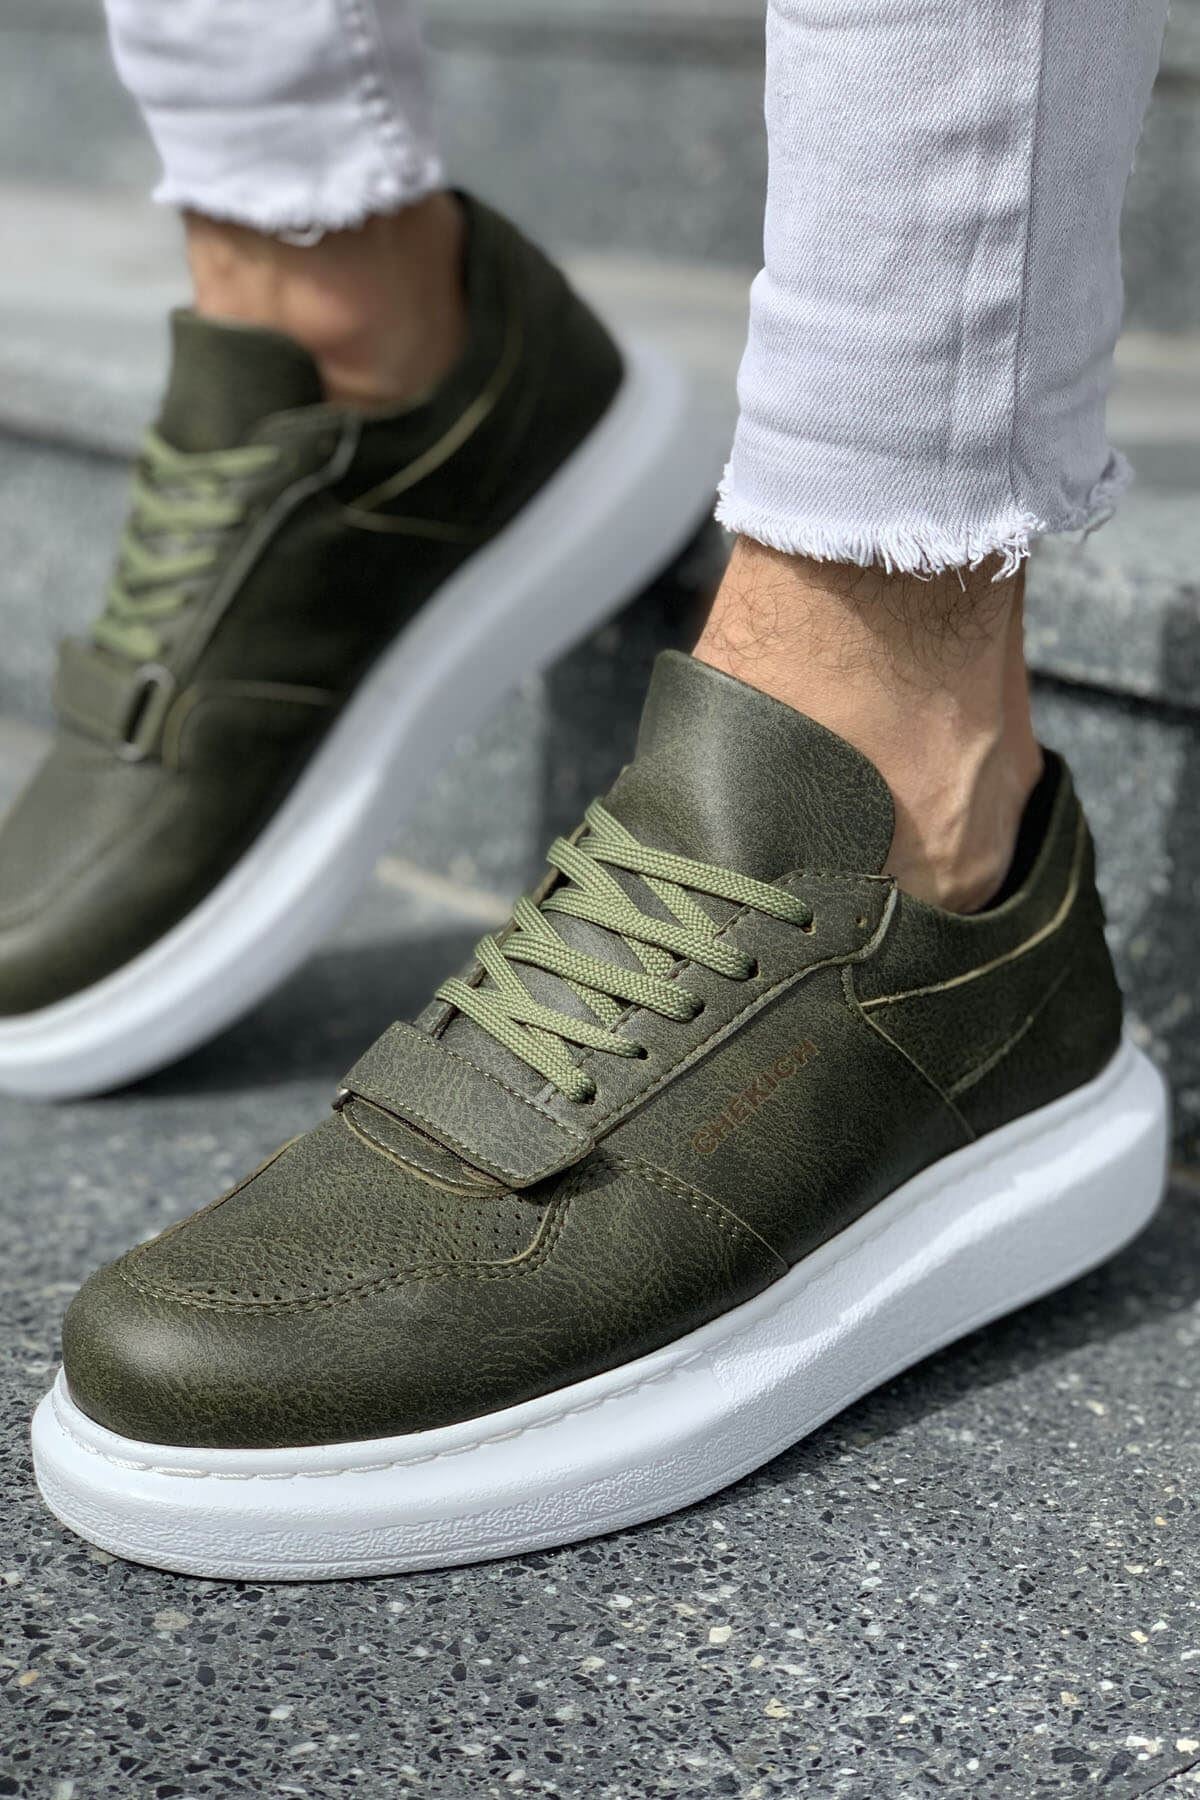 CH073 Men's Unisex Khaki Lace-Up Casual Sneaker Sports Shoes - STREETMODE ™